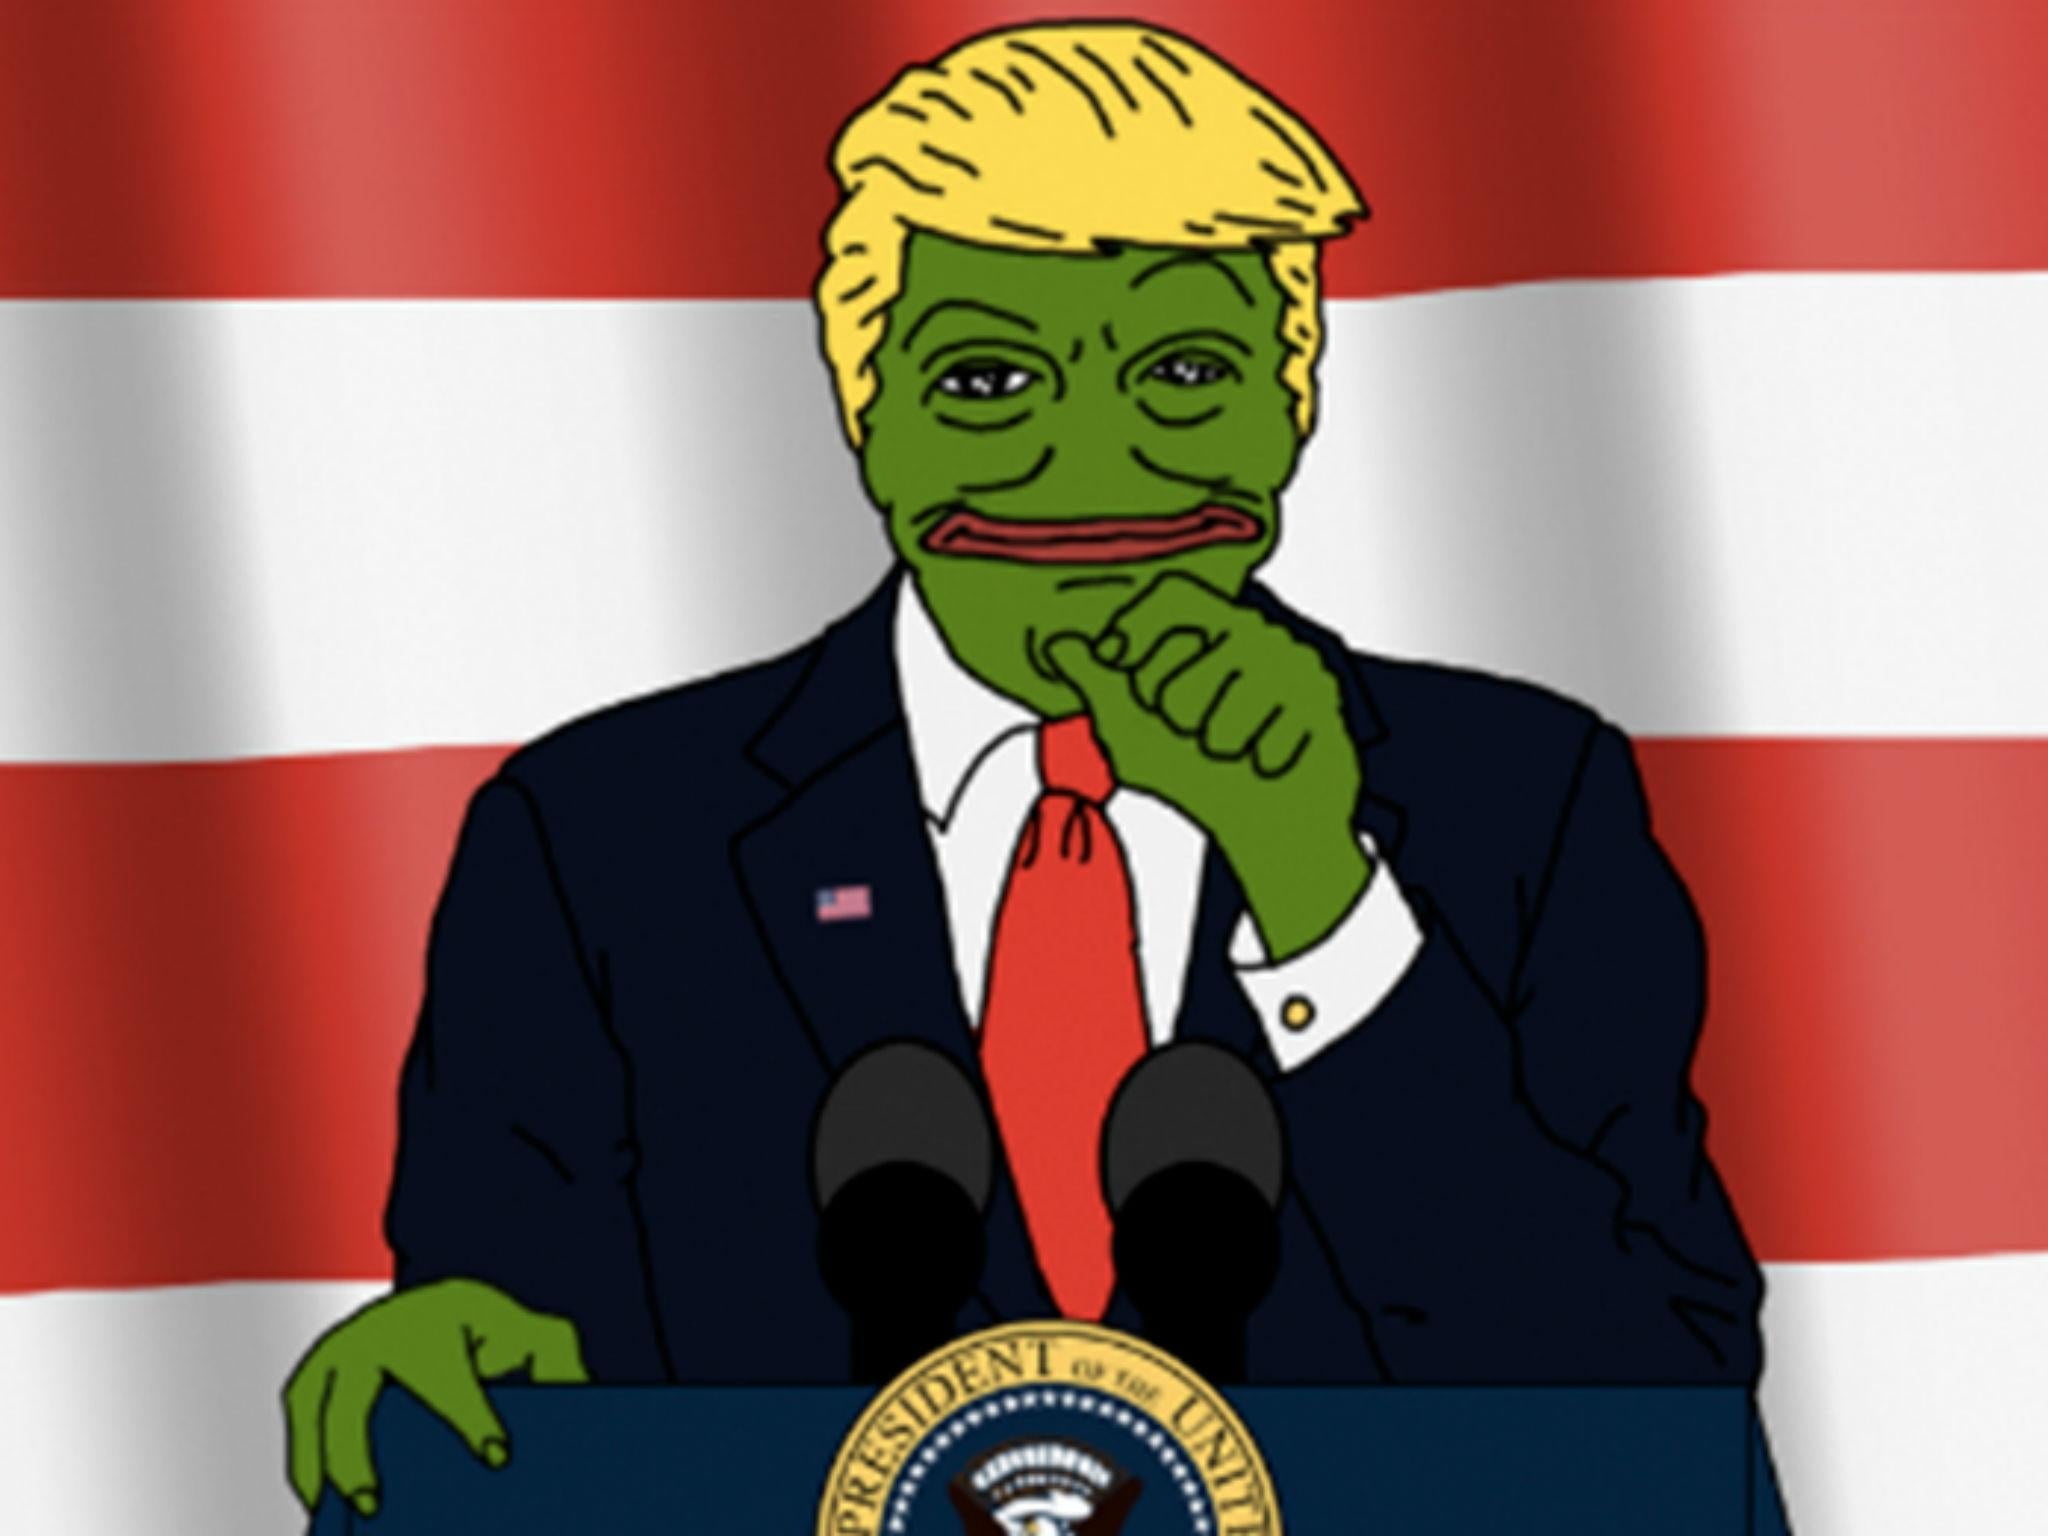 Pepe the Frog as Donald Trump